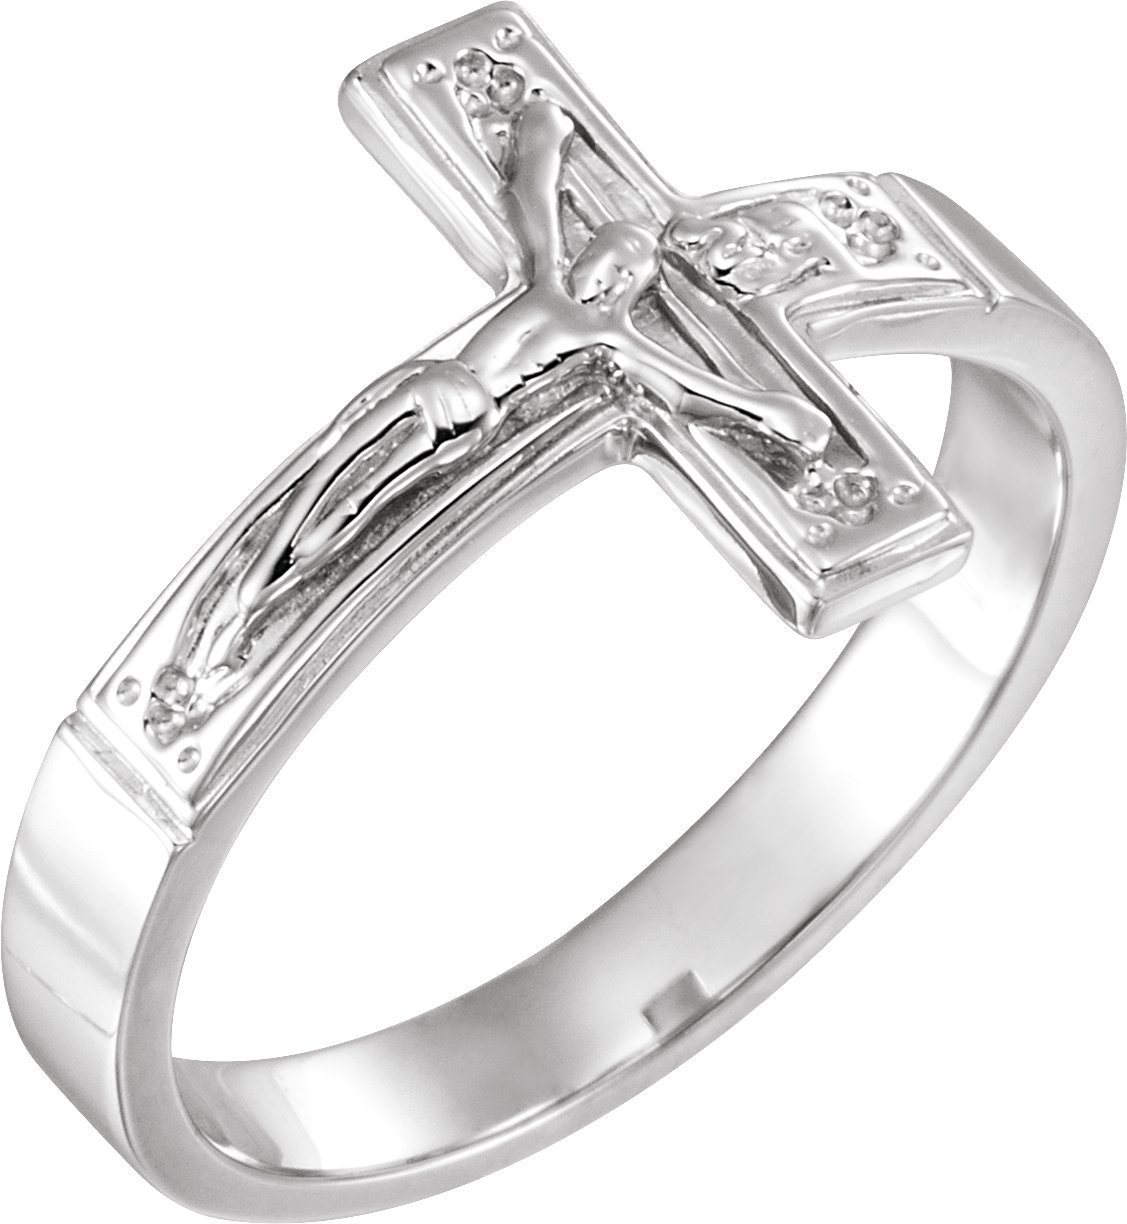 Sterling Silver 15 mm Crucifix Chastity Ring Size 9